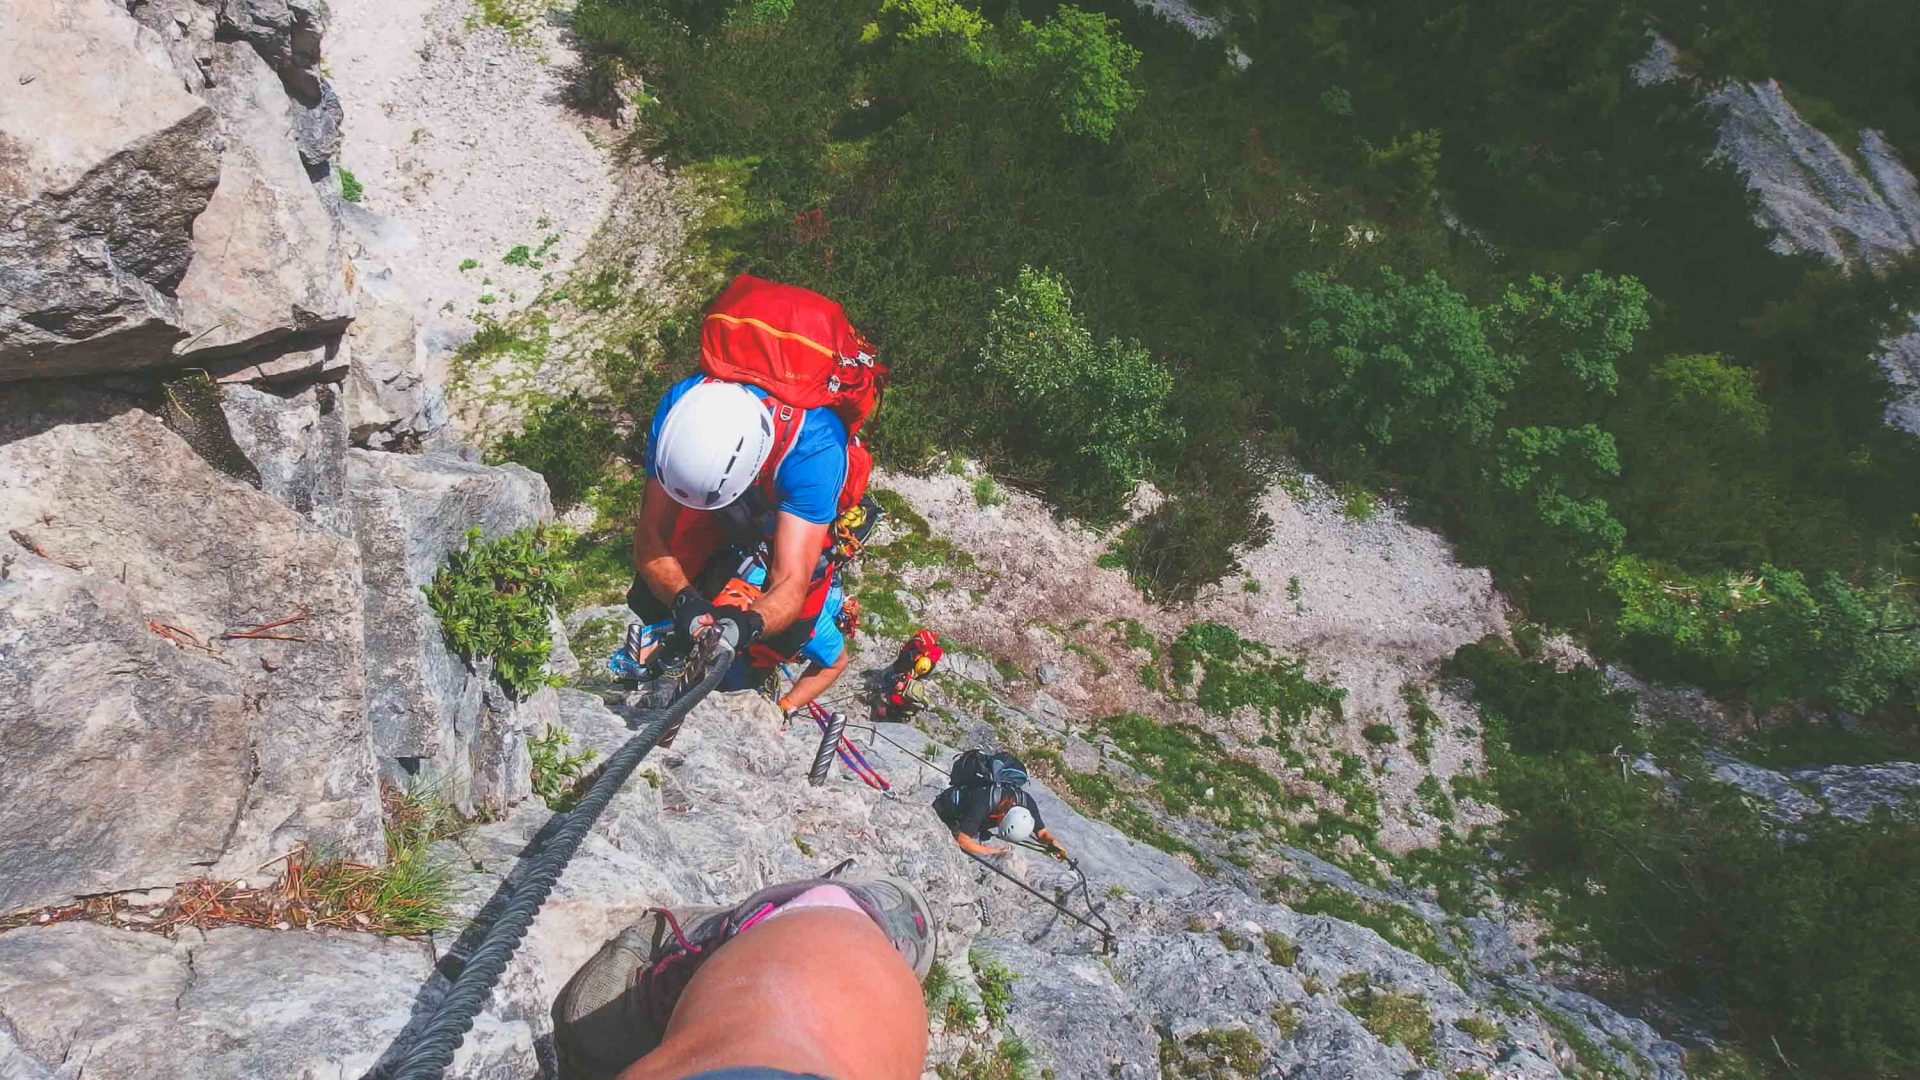 Abseilers take on a steep rock face.